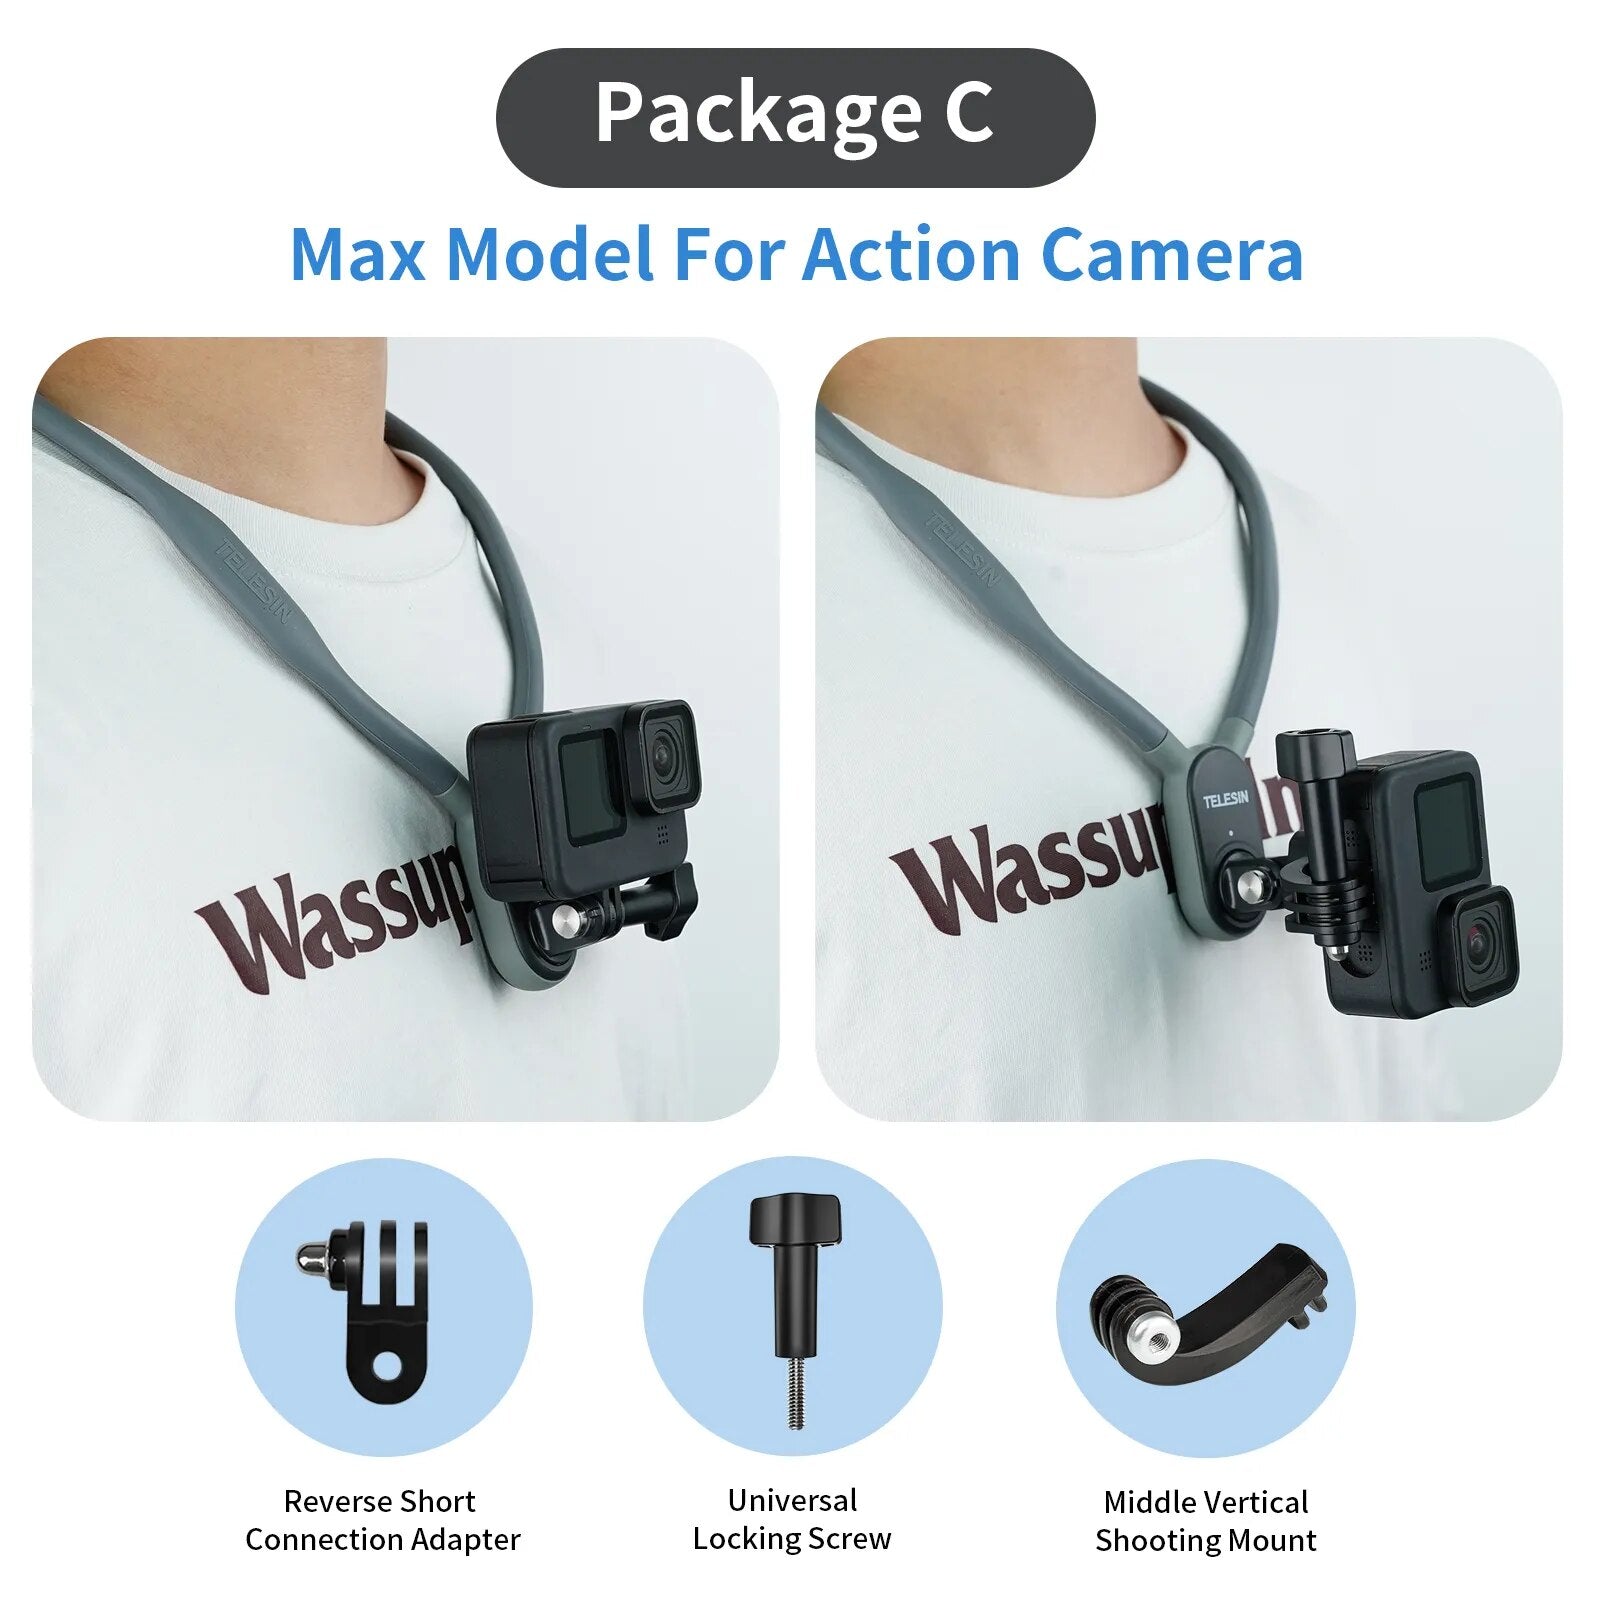 Neck Magnetic Hold Mount